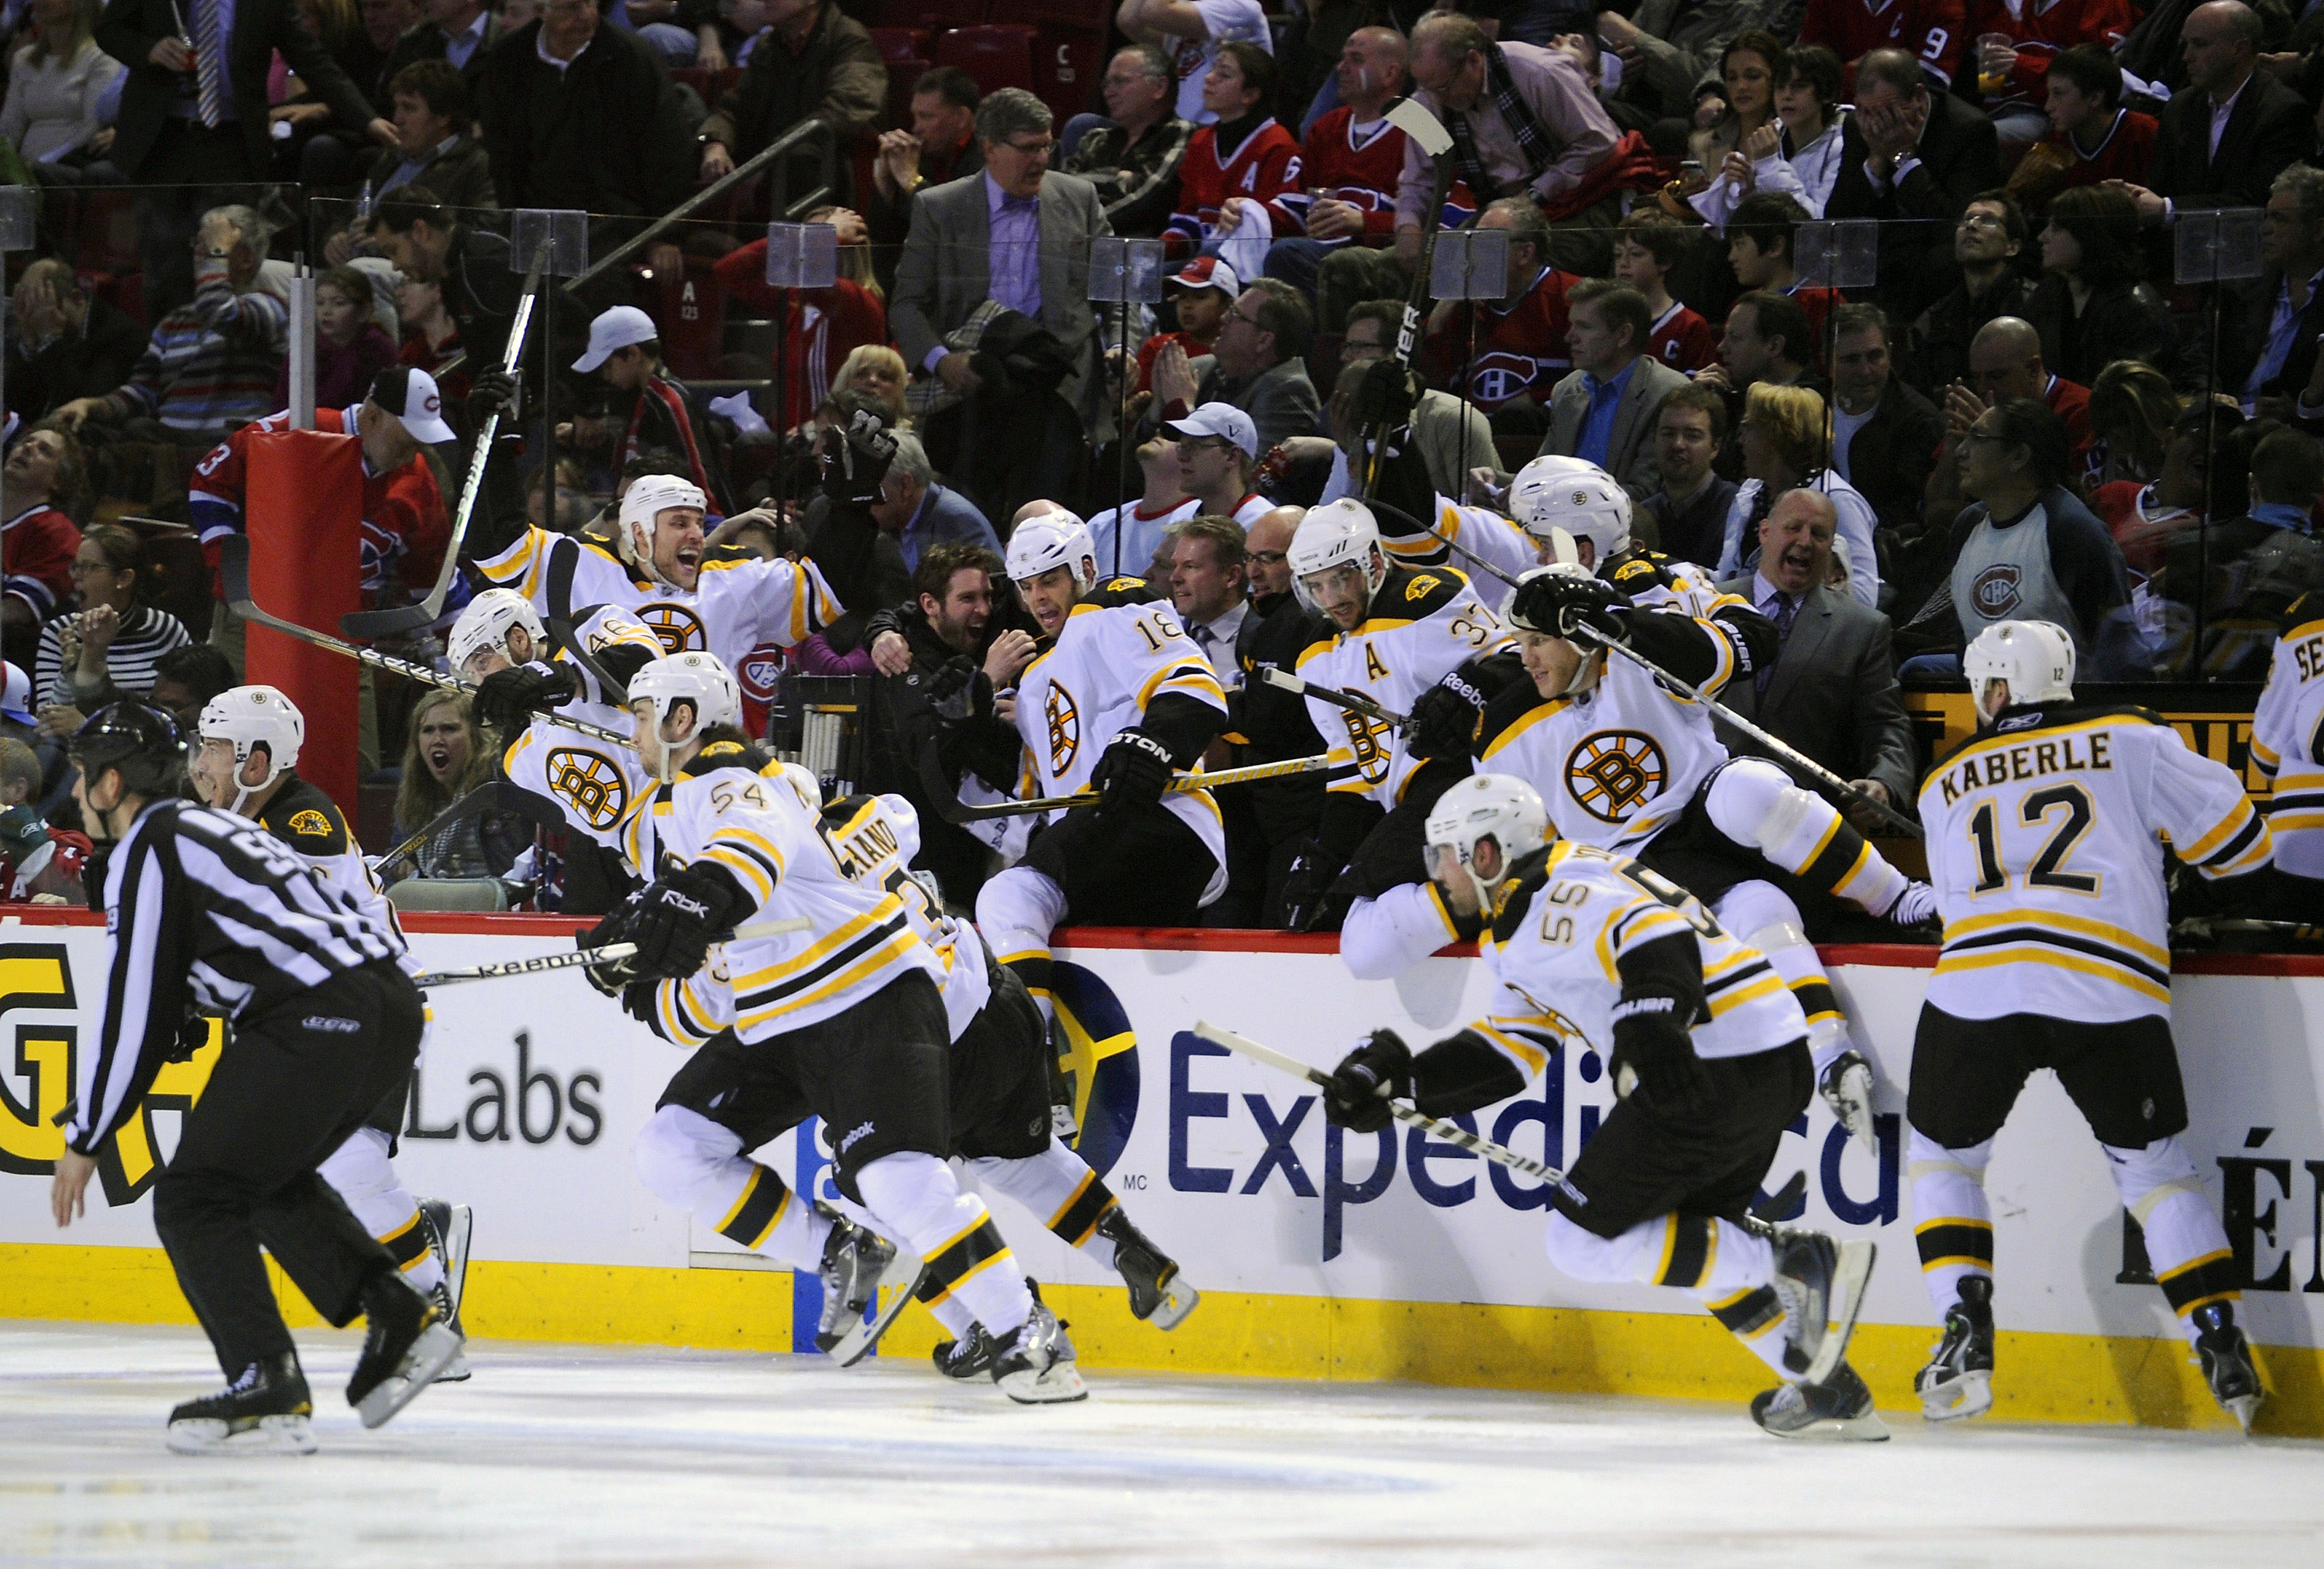 N.H.L. Playoffs: Horton Is Bruins' Finishing Touch - The New York Times